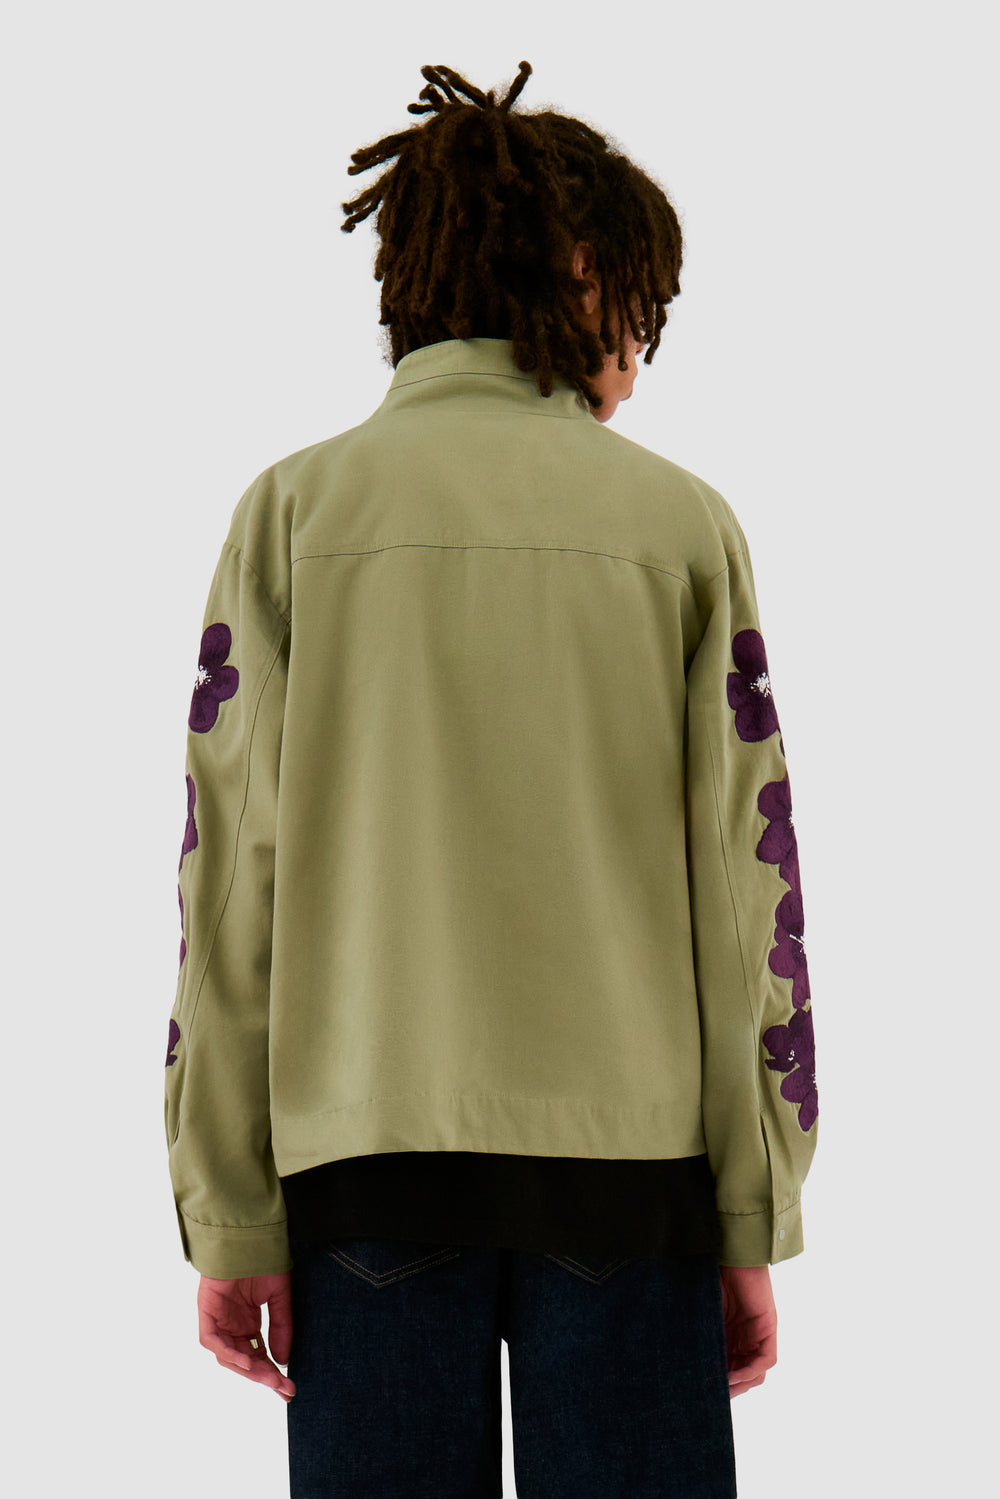 Flower Embroidery Jacket - Olive Green